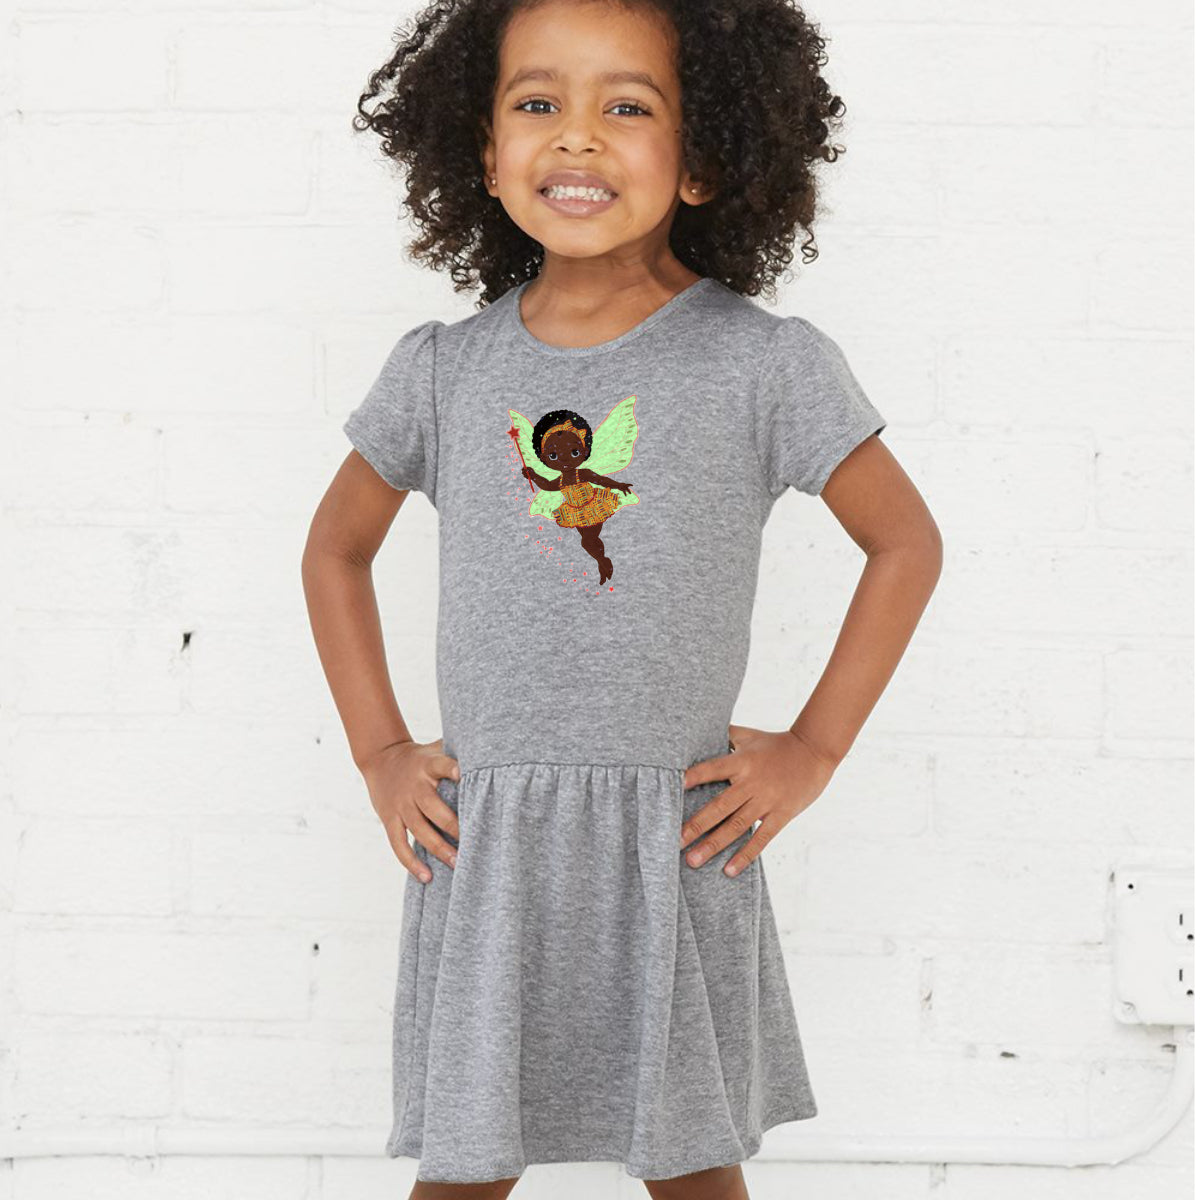 Black Girl Magic - Girl's Dress. Ages 6M to 6 years